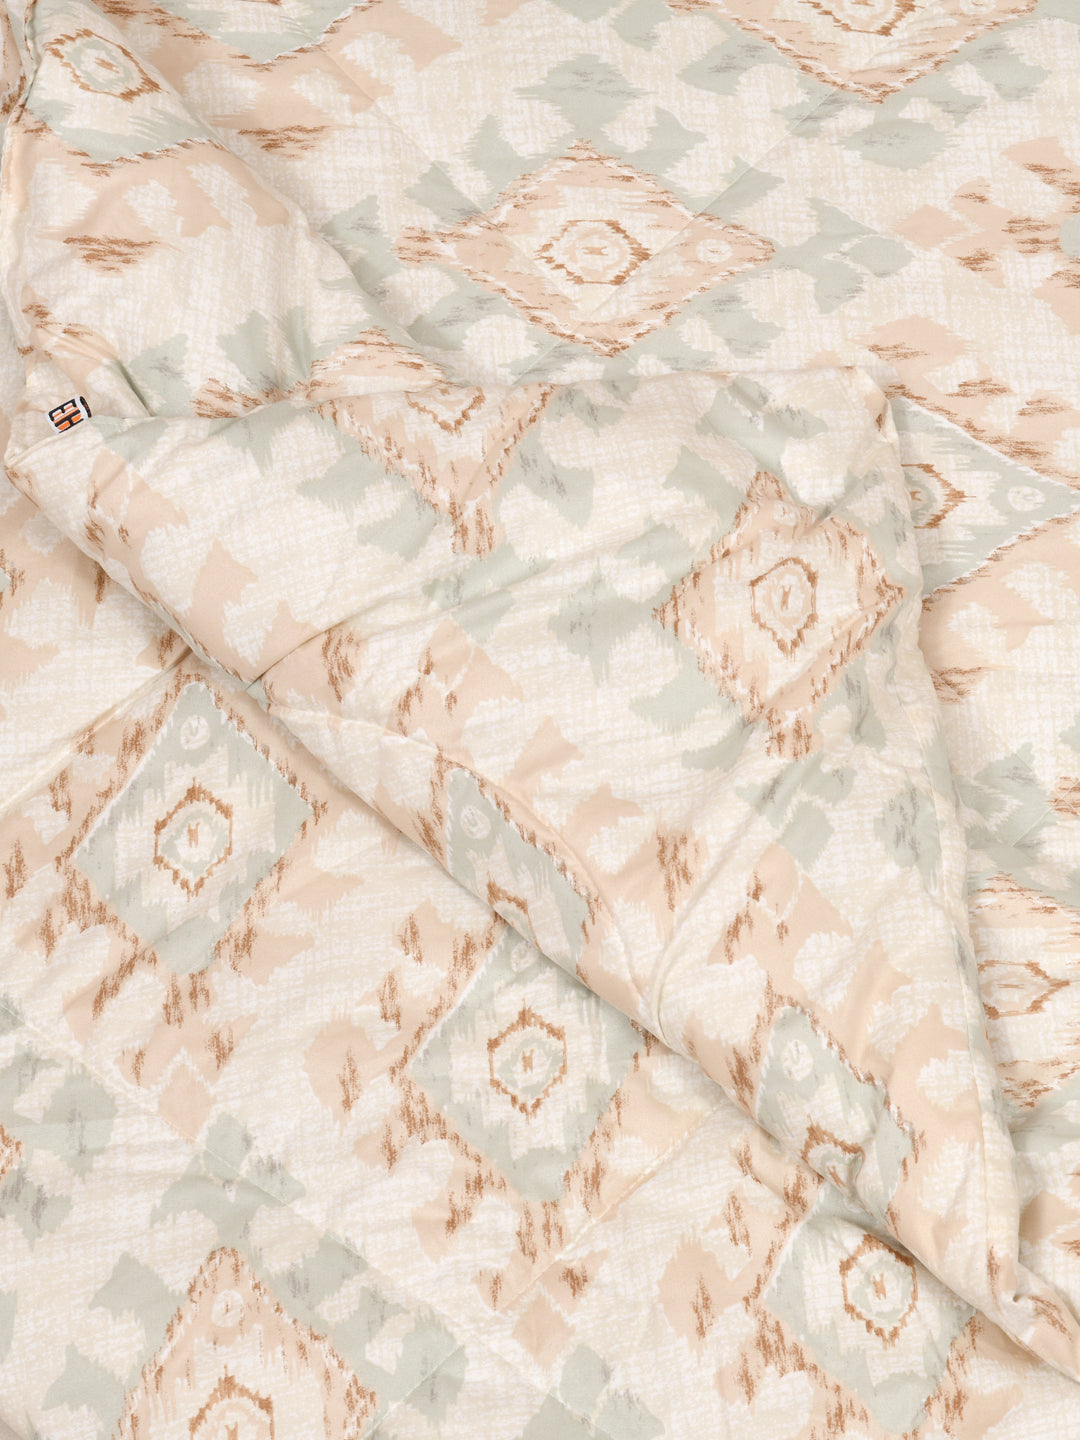 Cream and Green Double bed AC Printed Comforter